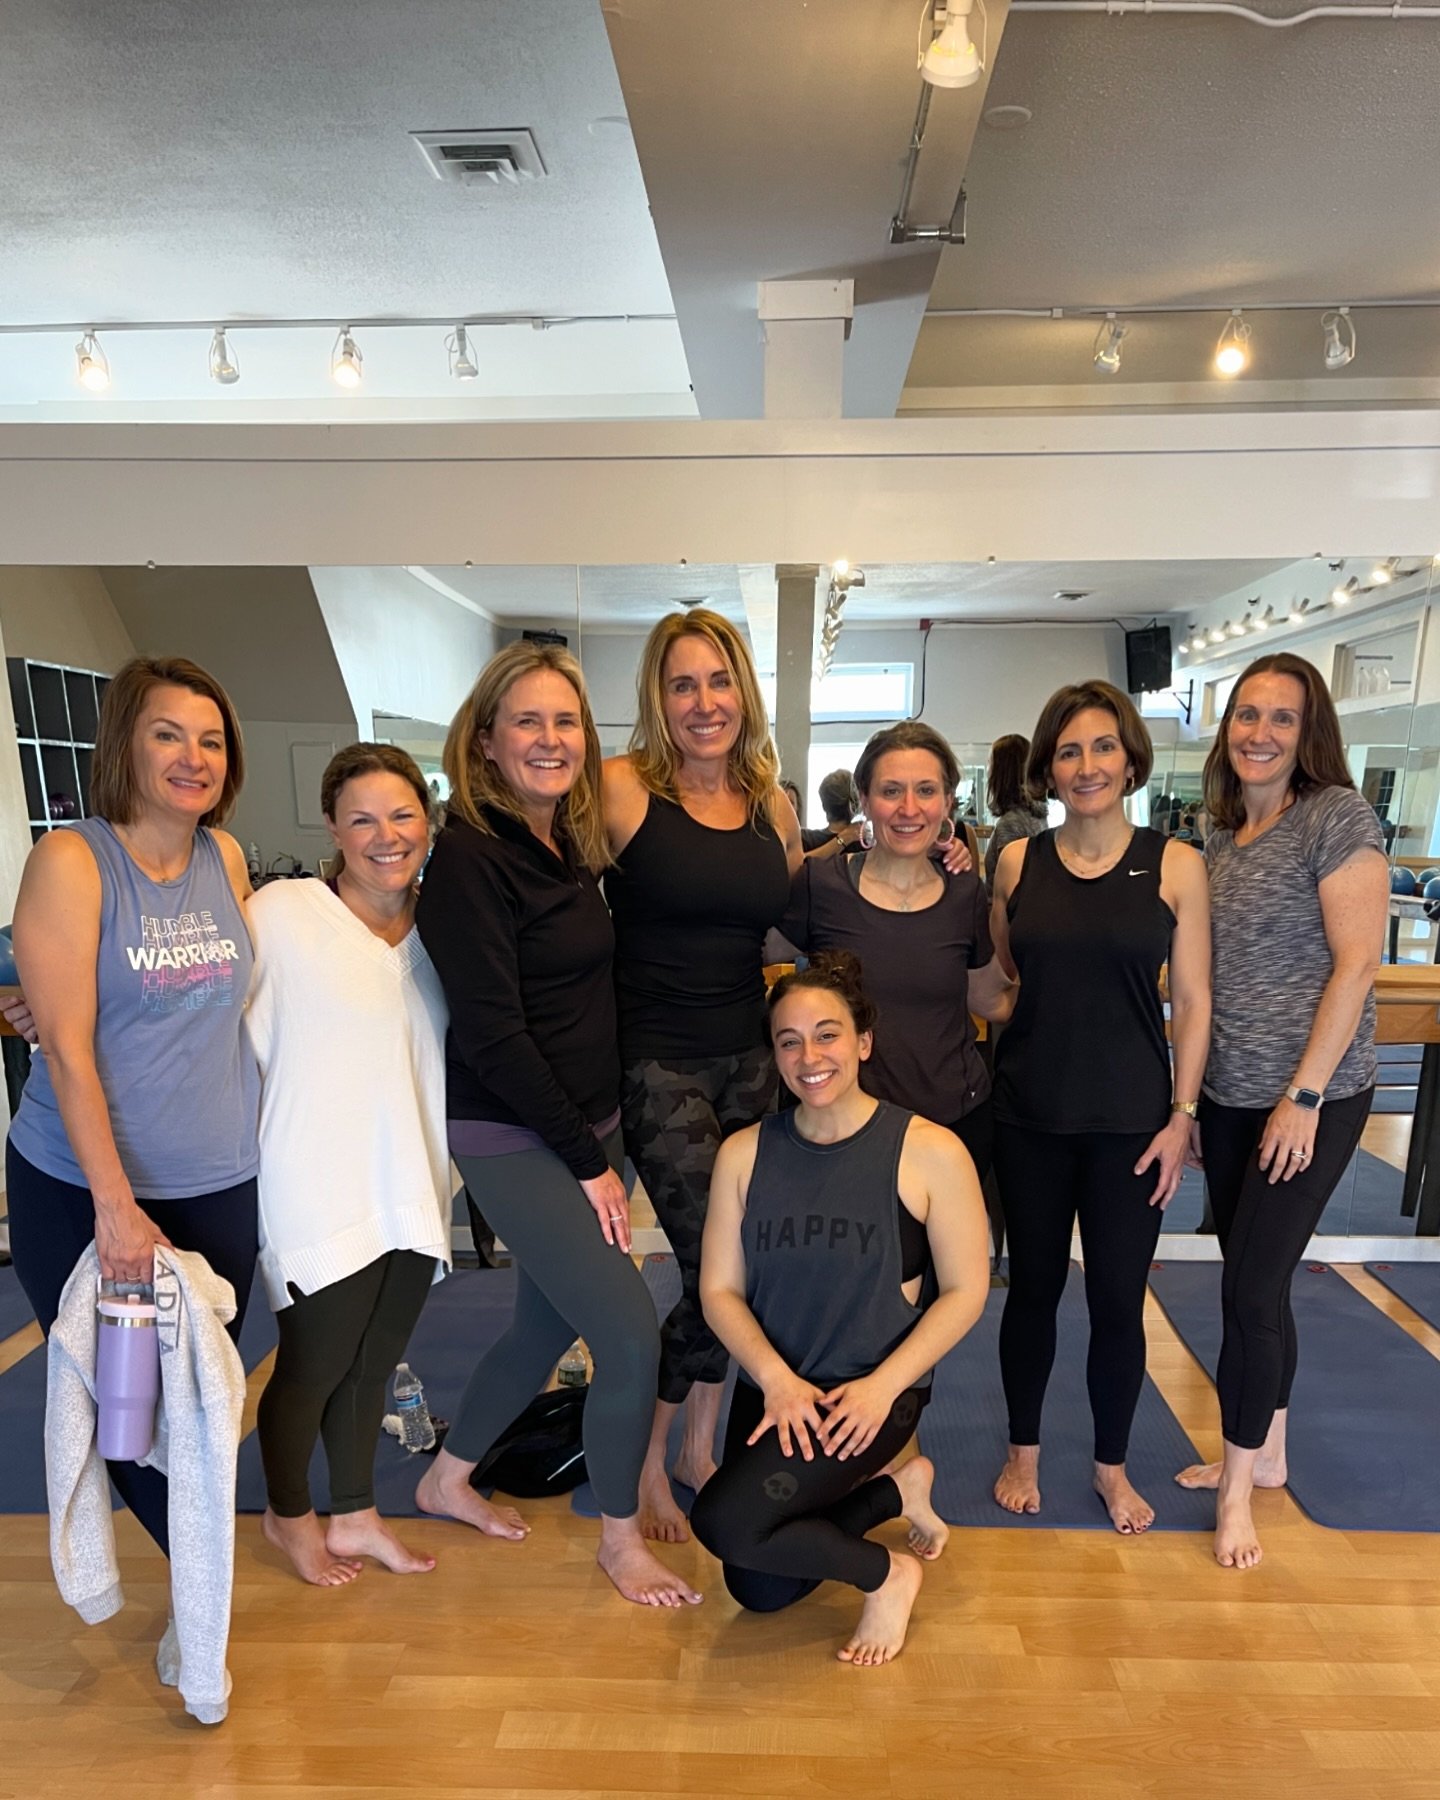 A fun afternoon of private barre!! 💃🏻

We love when our clients request private classes. They&rsquo;re the perfect event for special weekends, bachelorette parties, family parties, or even corporate events! 

We offer private barre, yoga, boxing, a